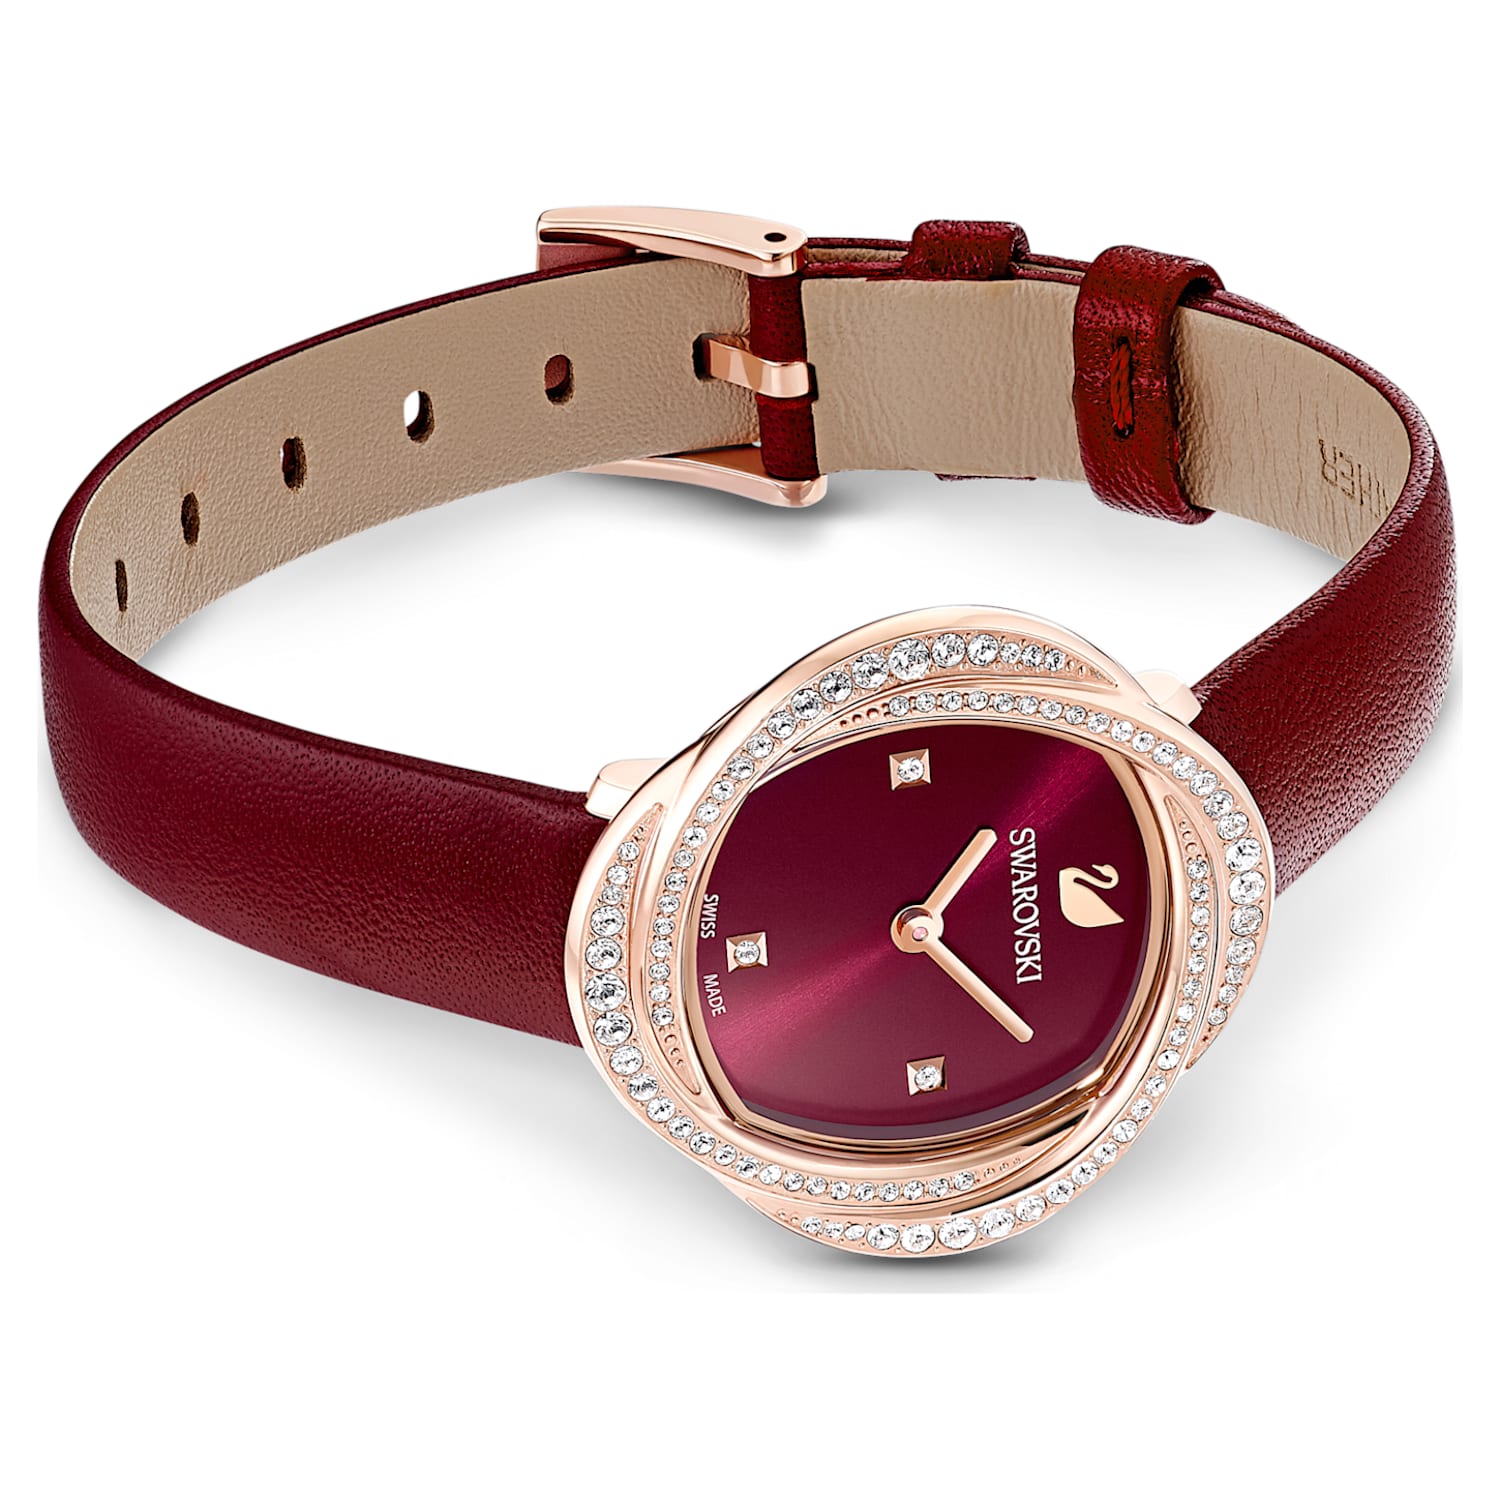 Crystal Flower watch, Leather strap, Red, Rose gold-tone finish